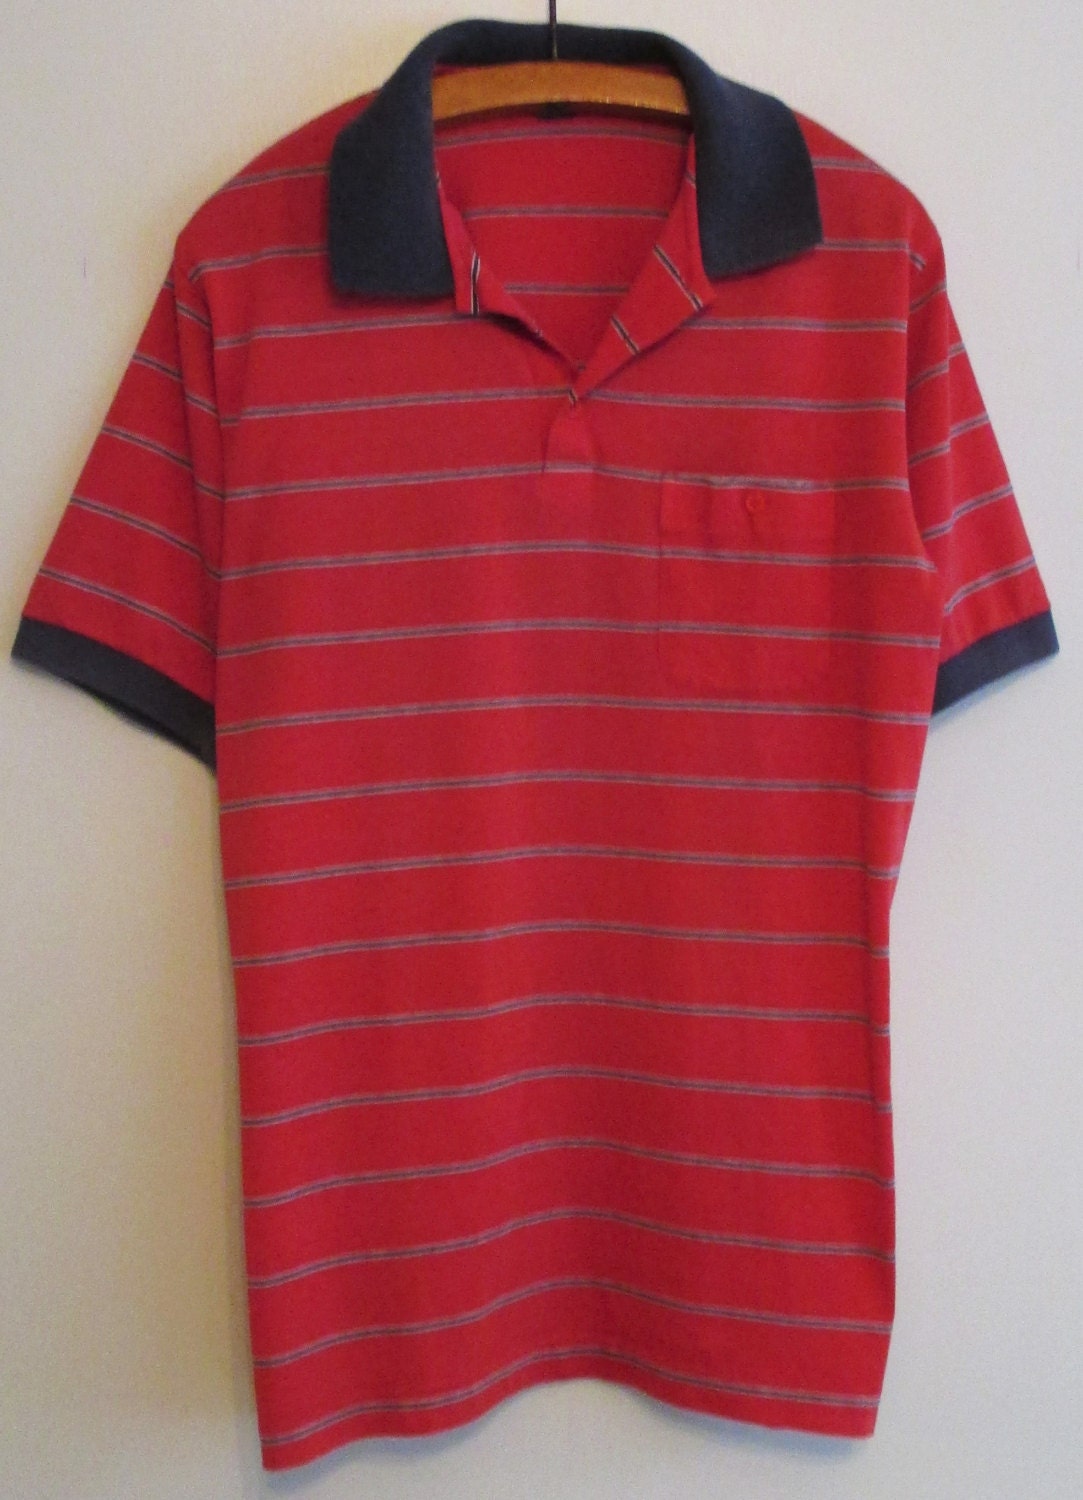 jcpenney polo red